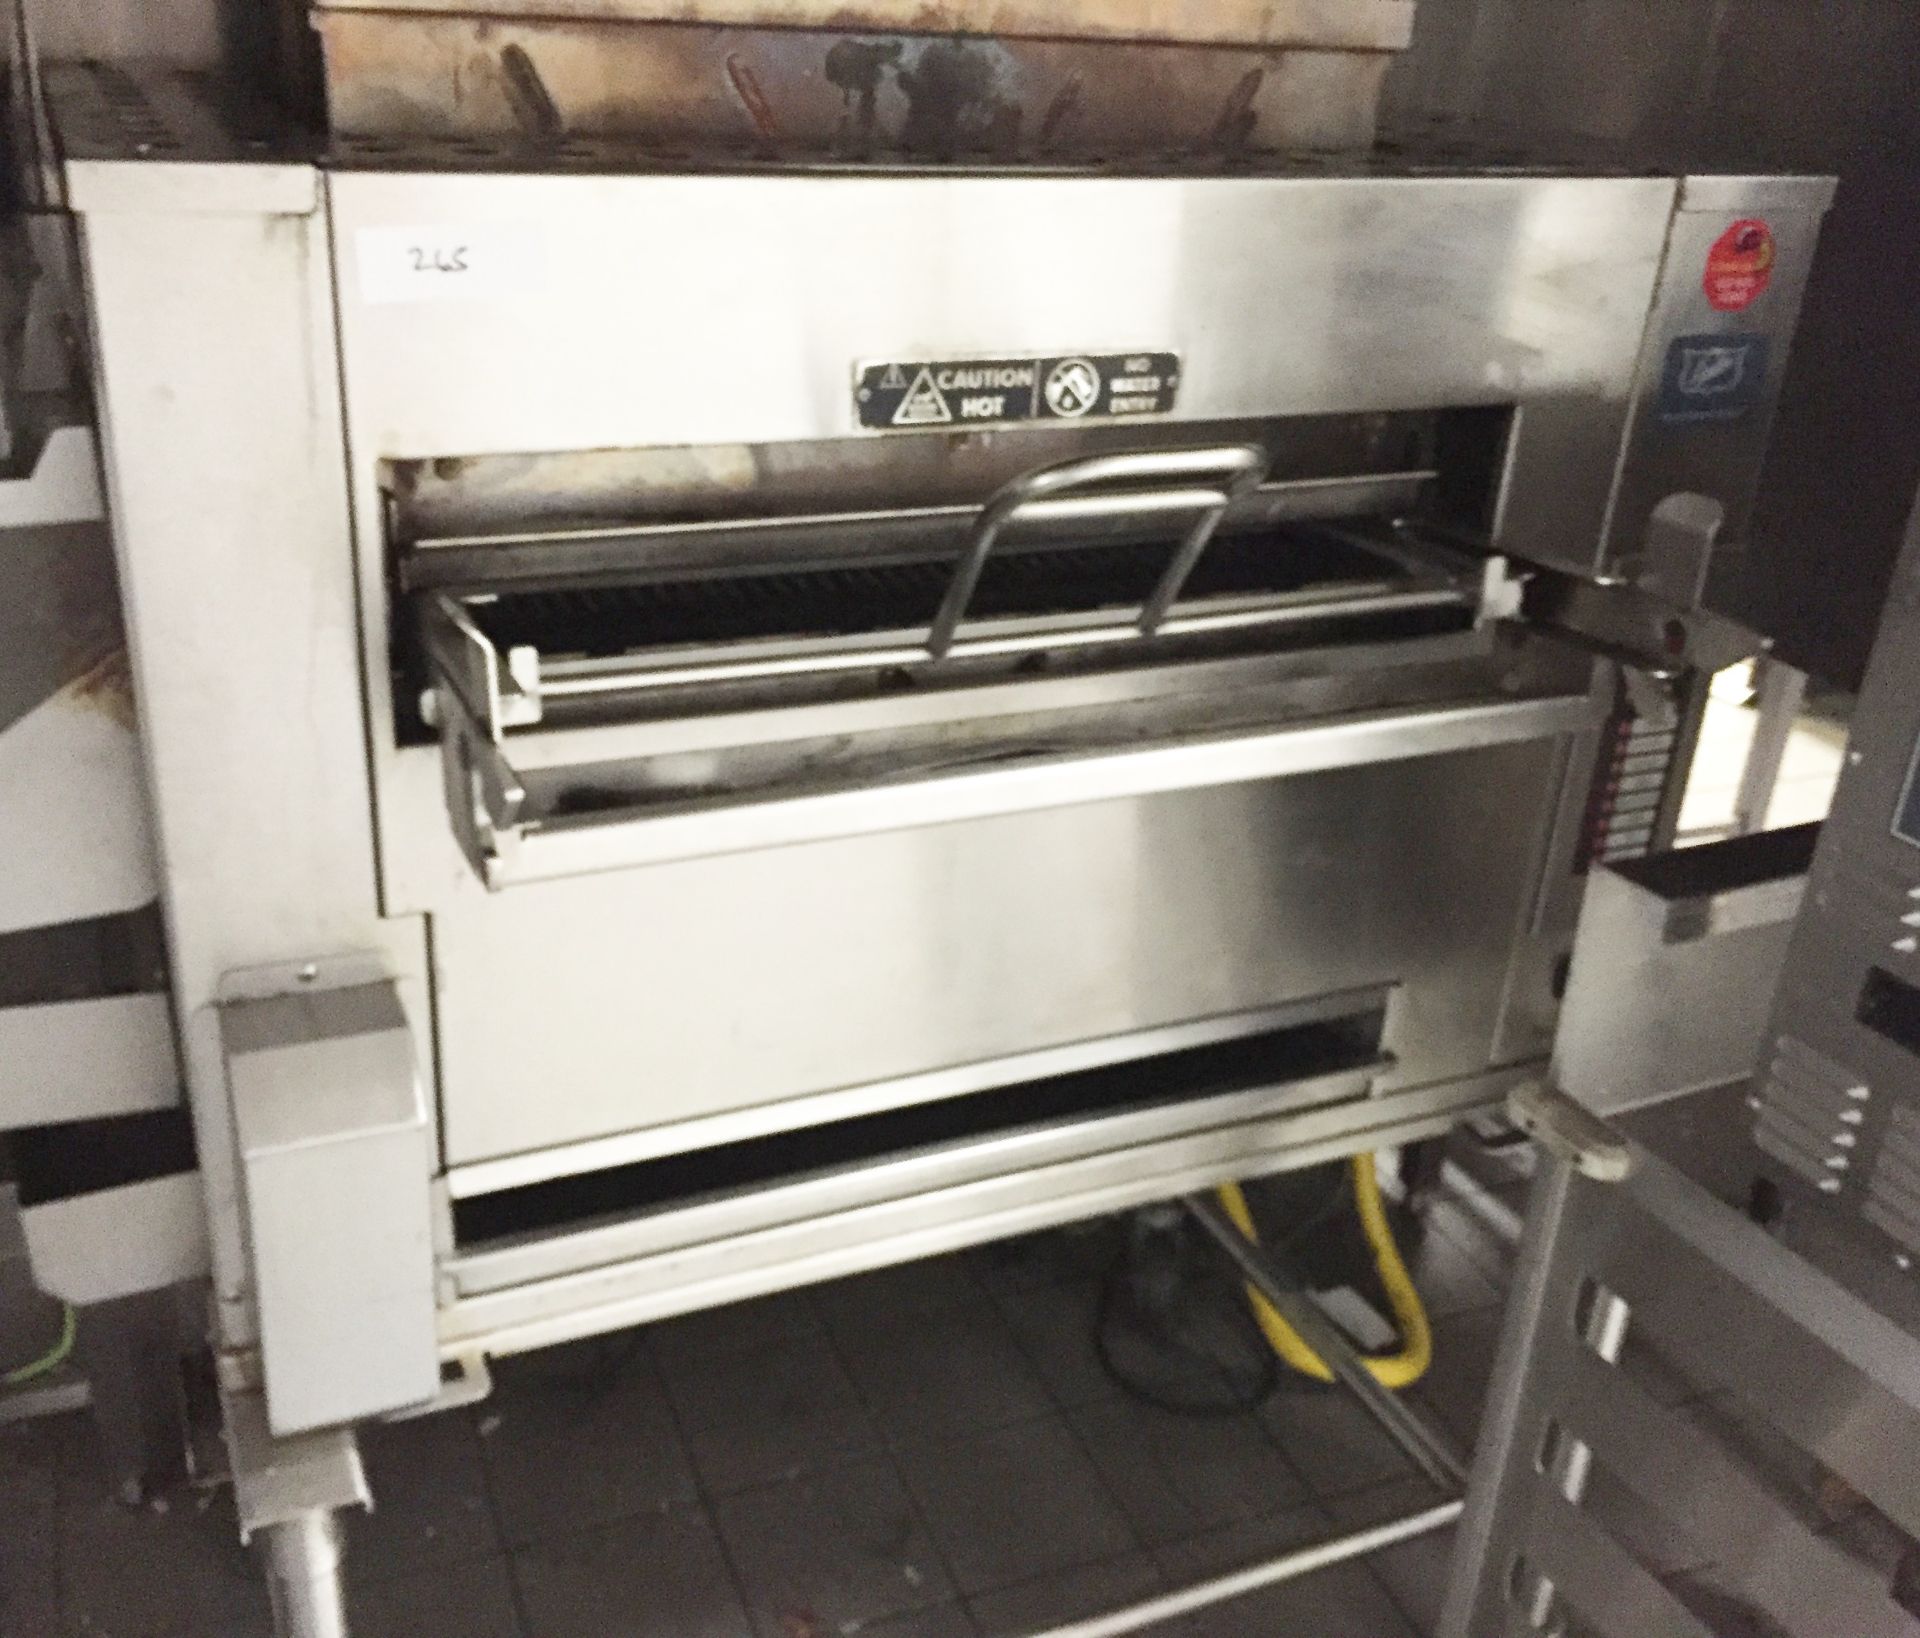 1 x Duke Flexible Batch Broiler - Used in Burger King Restaurants - Flame Broils a Batch of